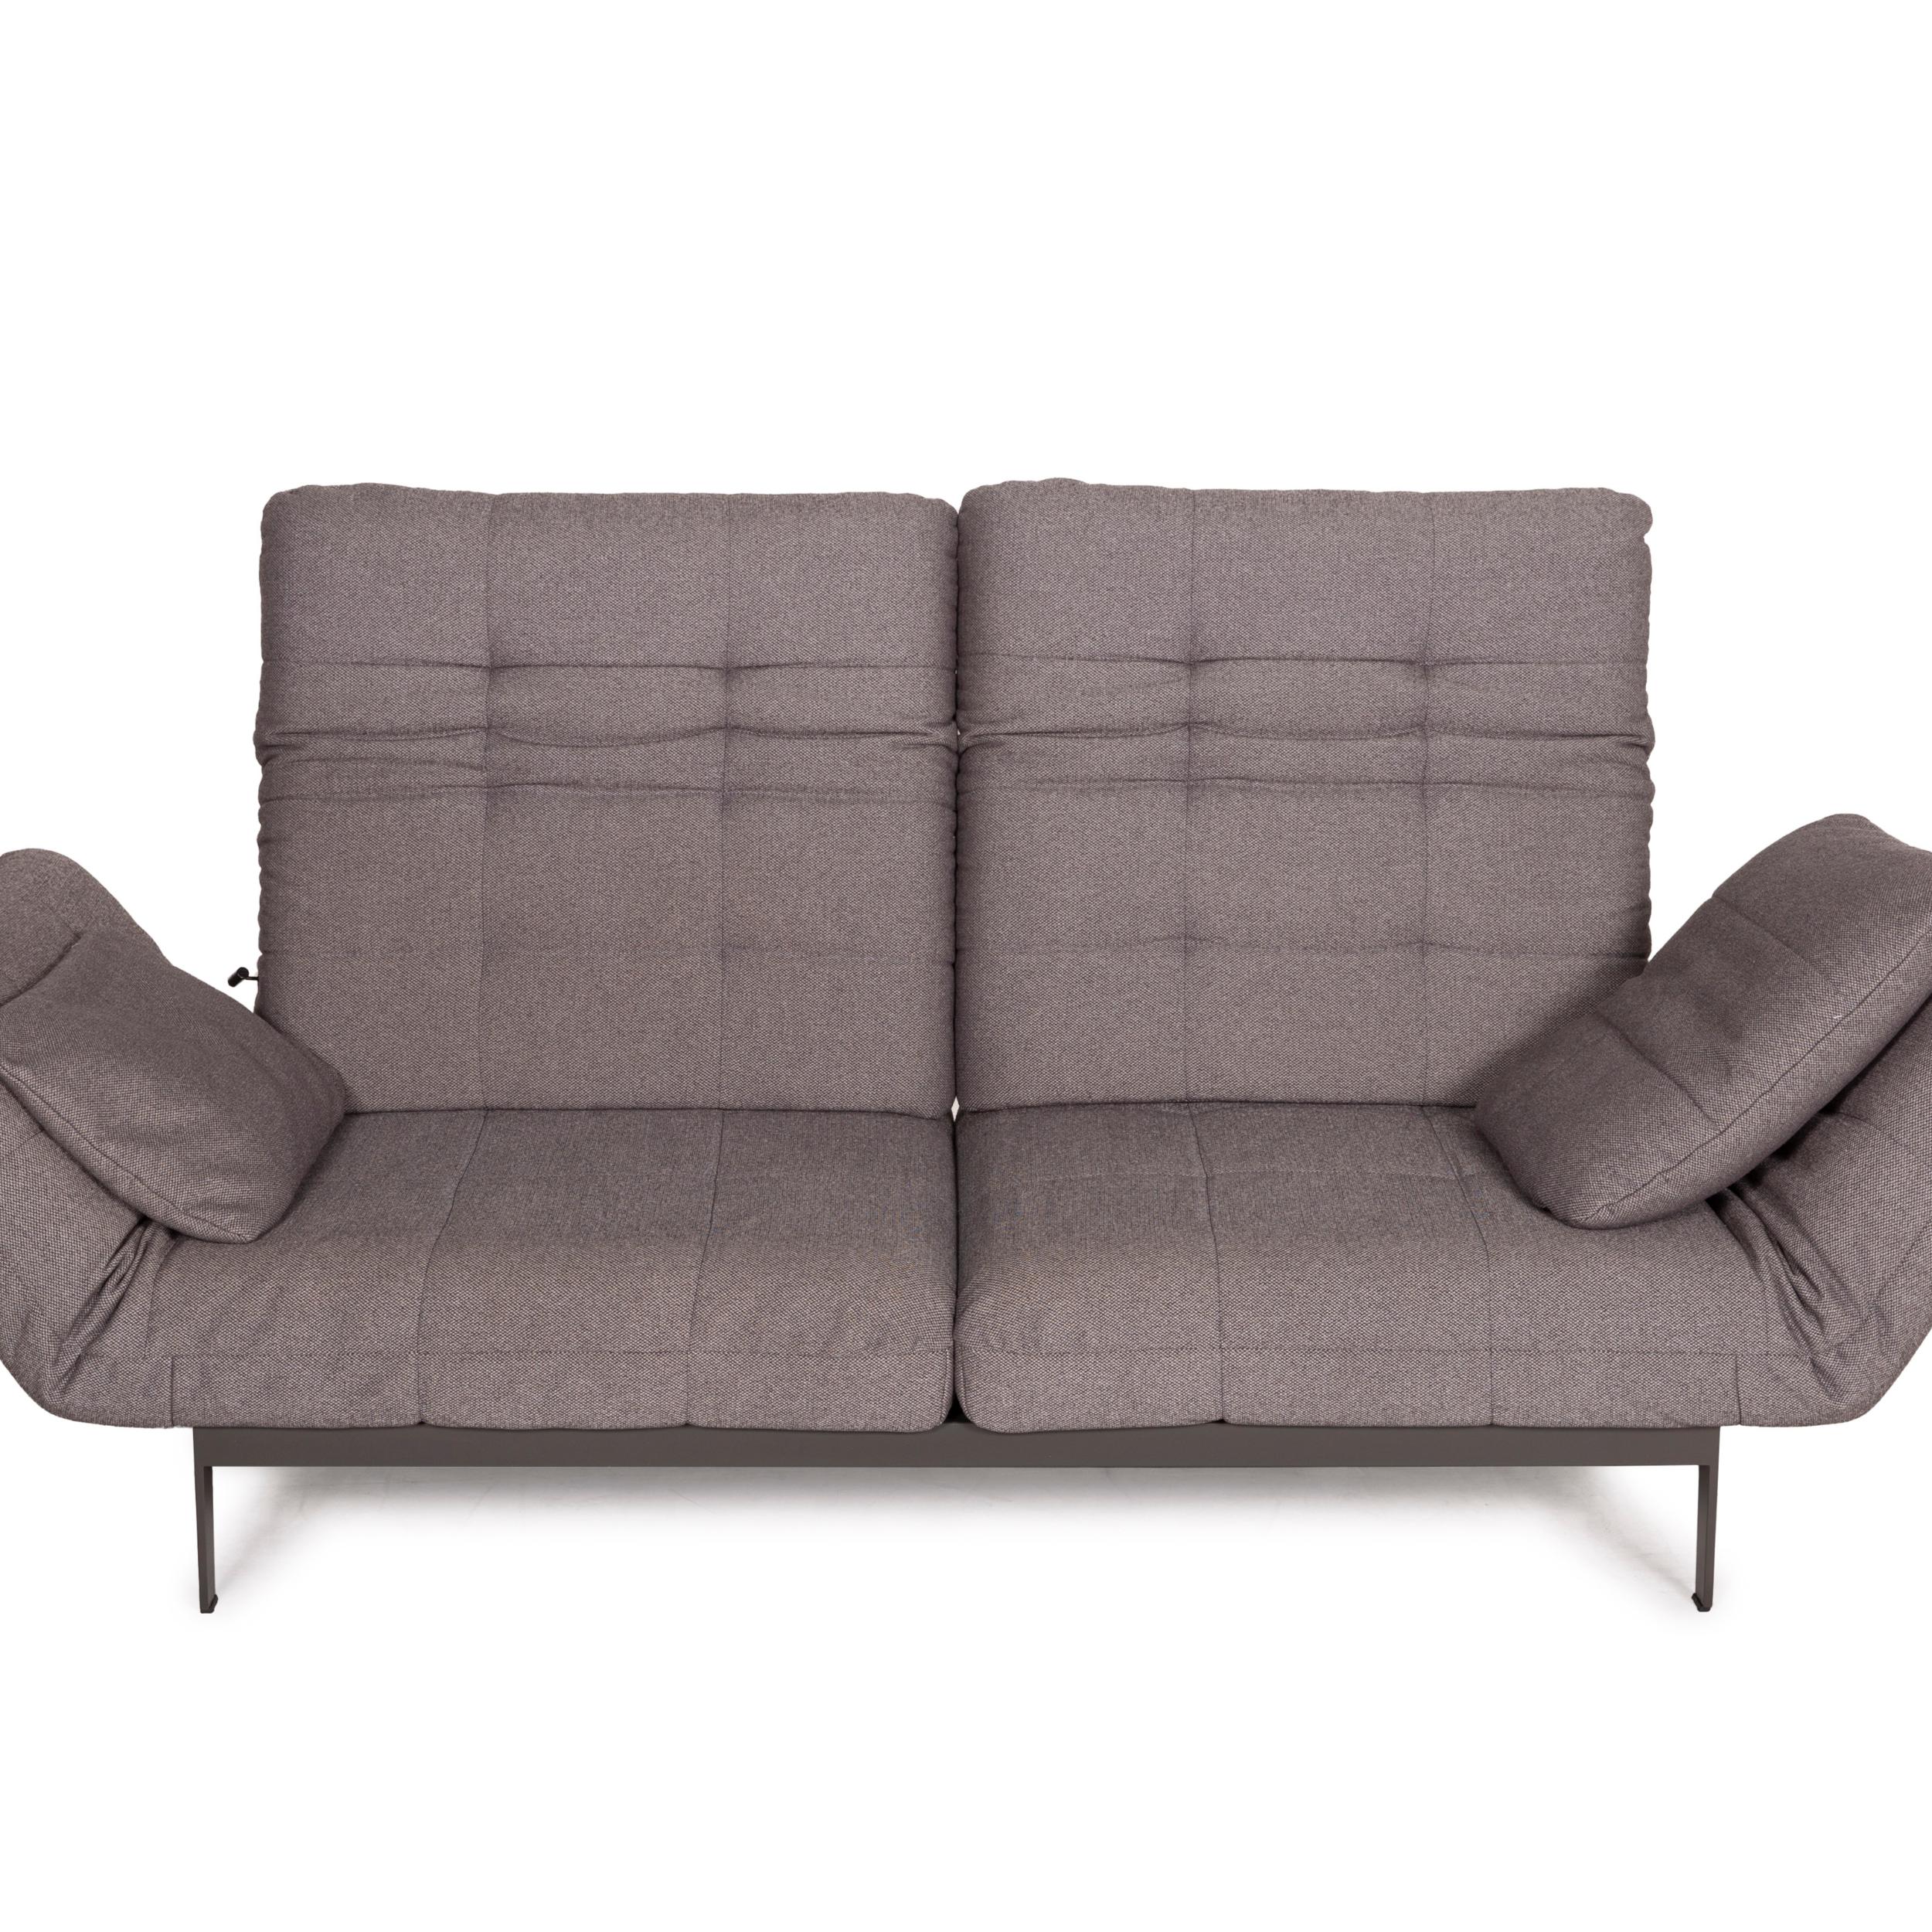 Rolf Benz Mera Fabric Sofa Two-Seater Sofa Fabric Gray Function For Sale 3